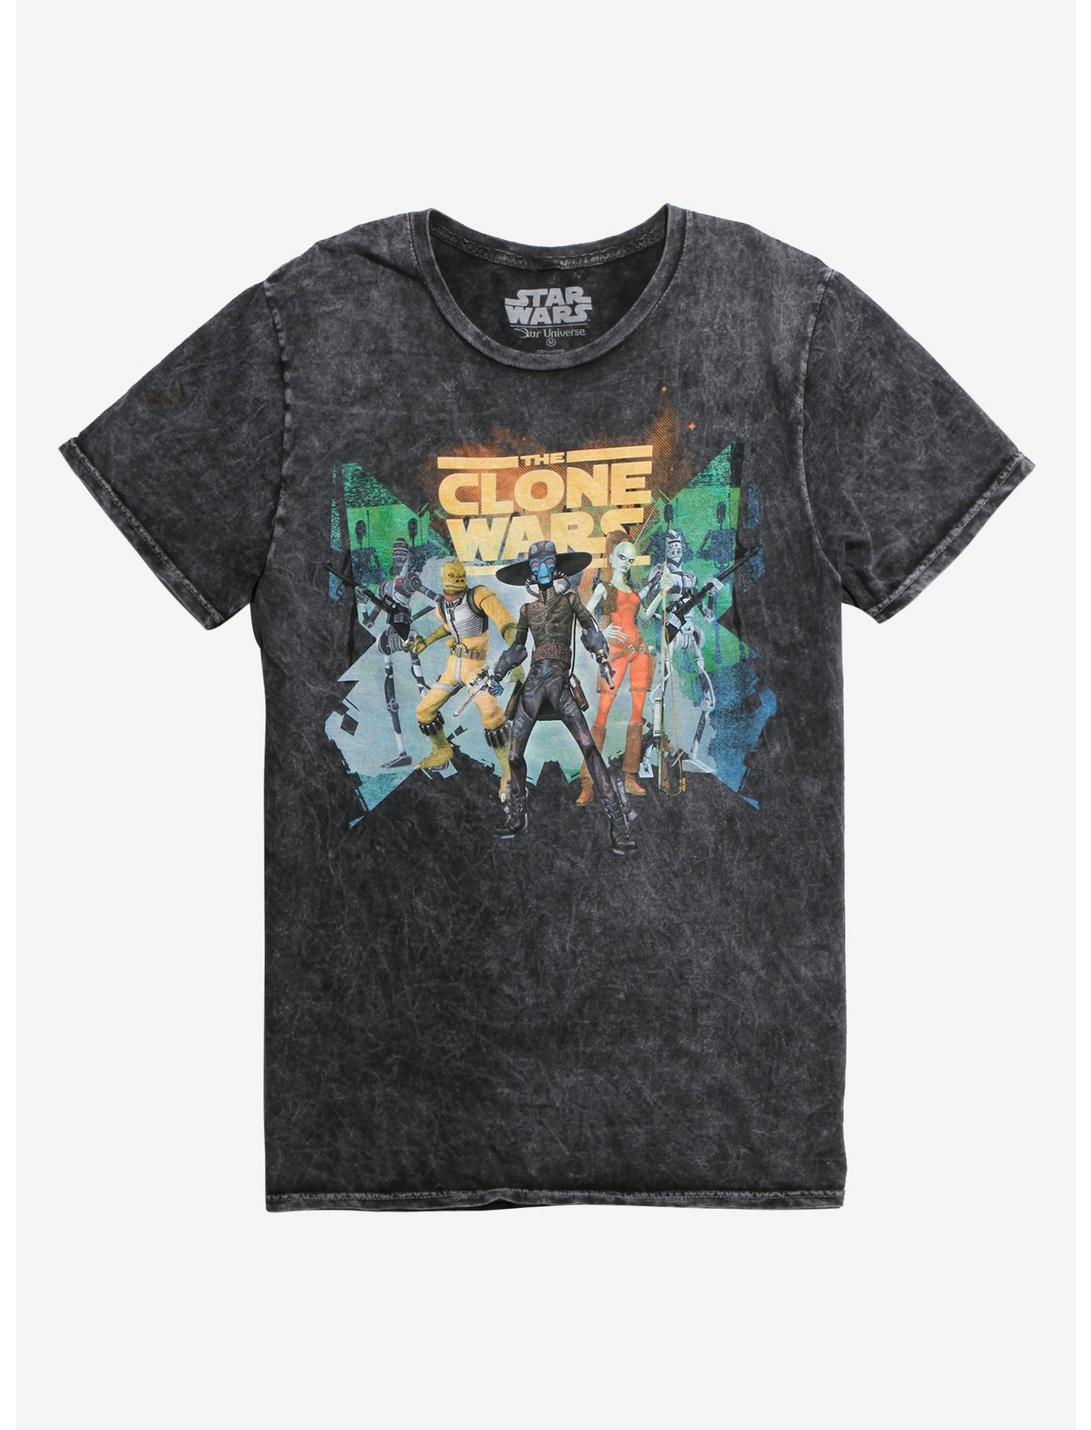 Our Universe Star Wars: The Clone Wars Bounty Hunter Wash T-Shirt Hot Topic Exclusive, MULTI, hi-res